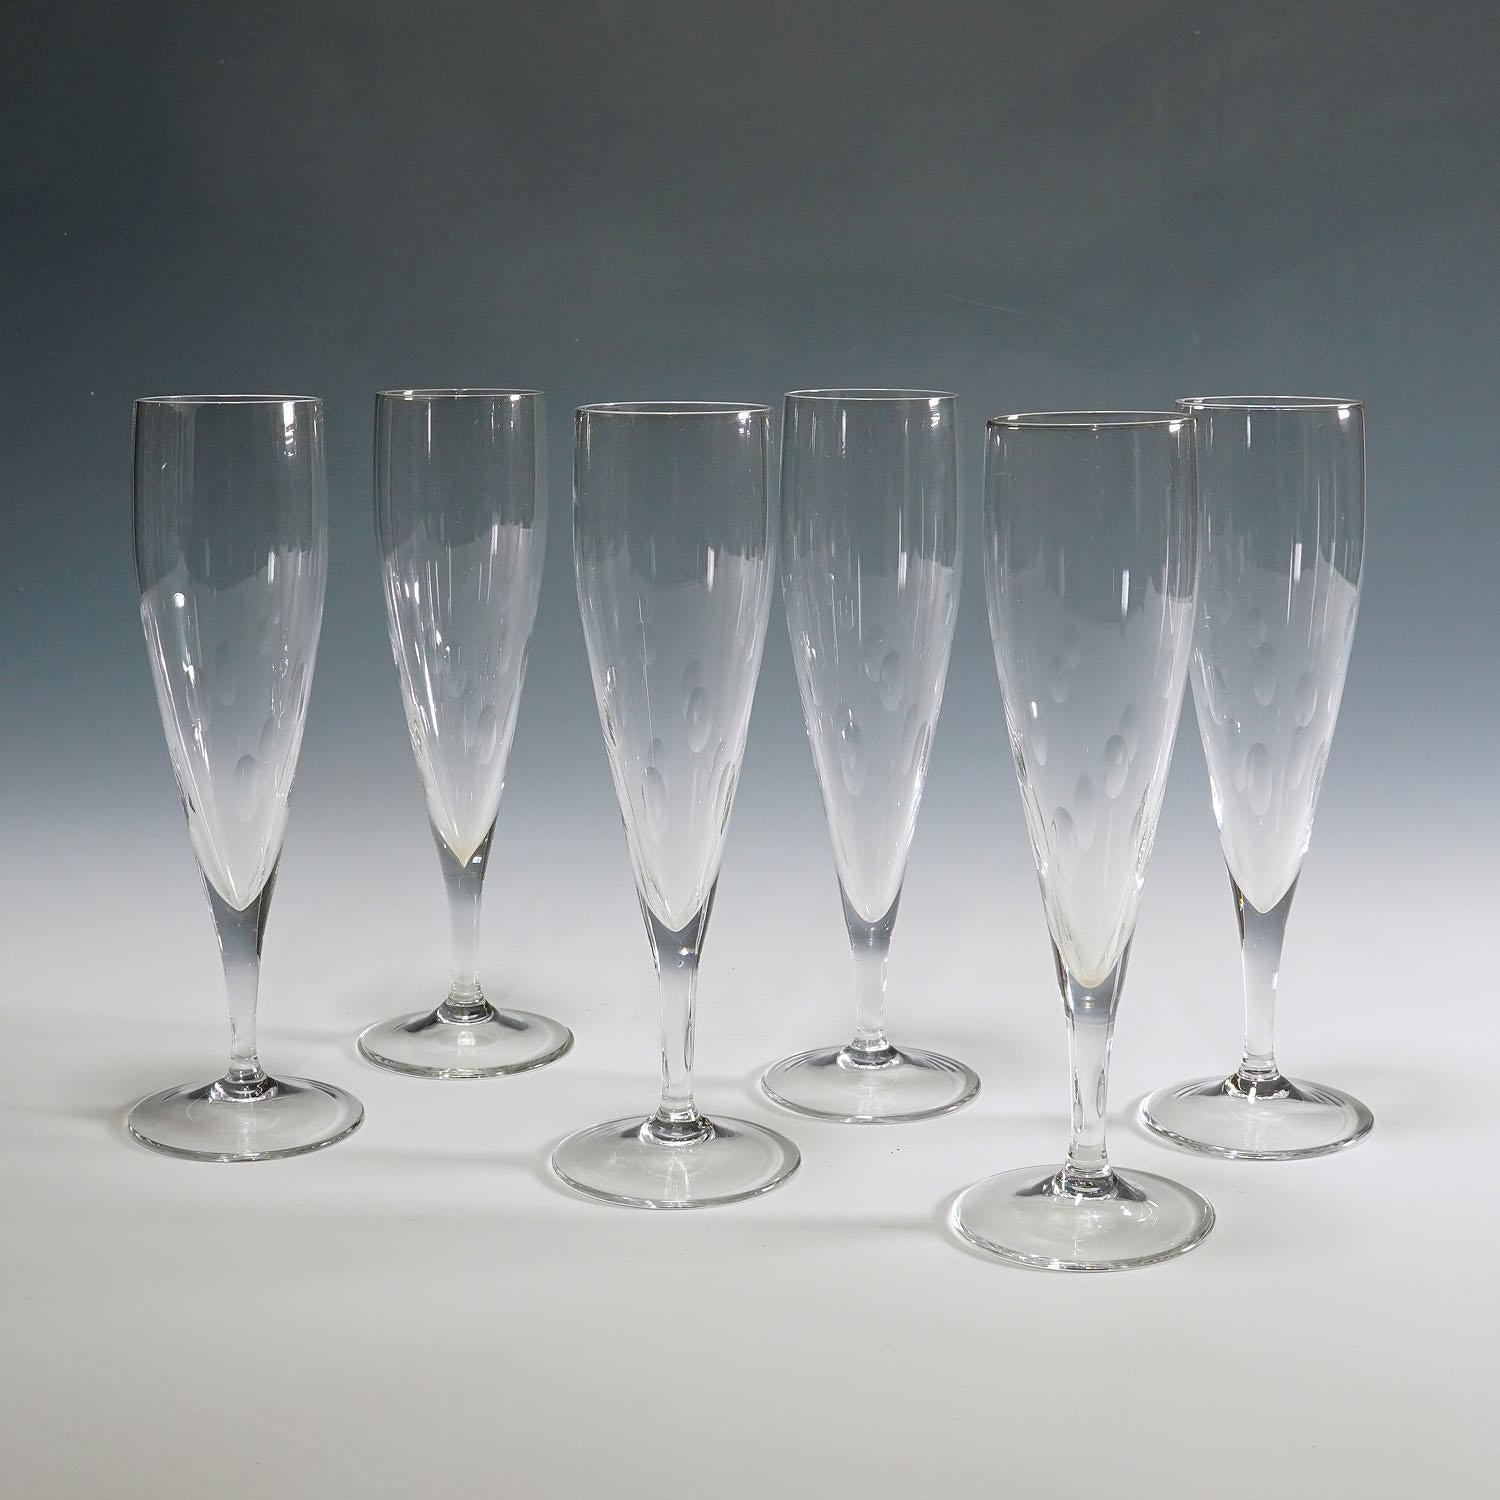 Set of Six Champagne Flutes by Wagenfeld for WMF, Germany, 1950s

This set of champagne flutes was designed by the former Bauhaus member Prof. Wilhelm Wagenfeld for WMF, Germany in 1951. The name of the design is 